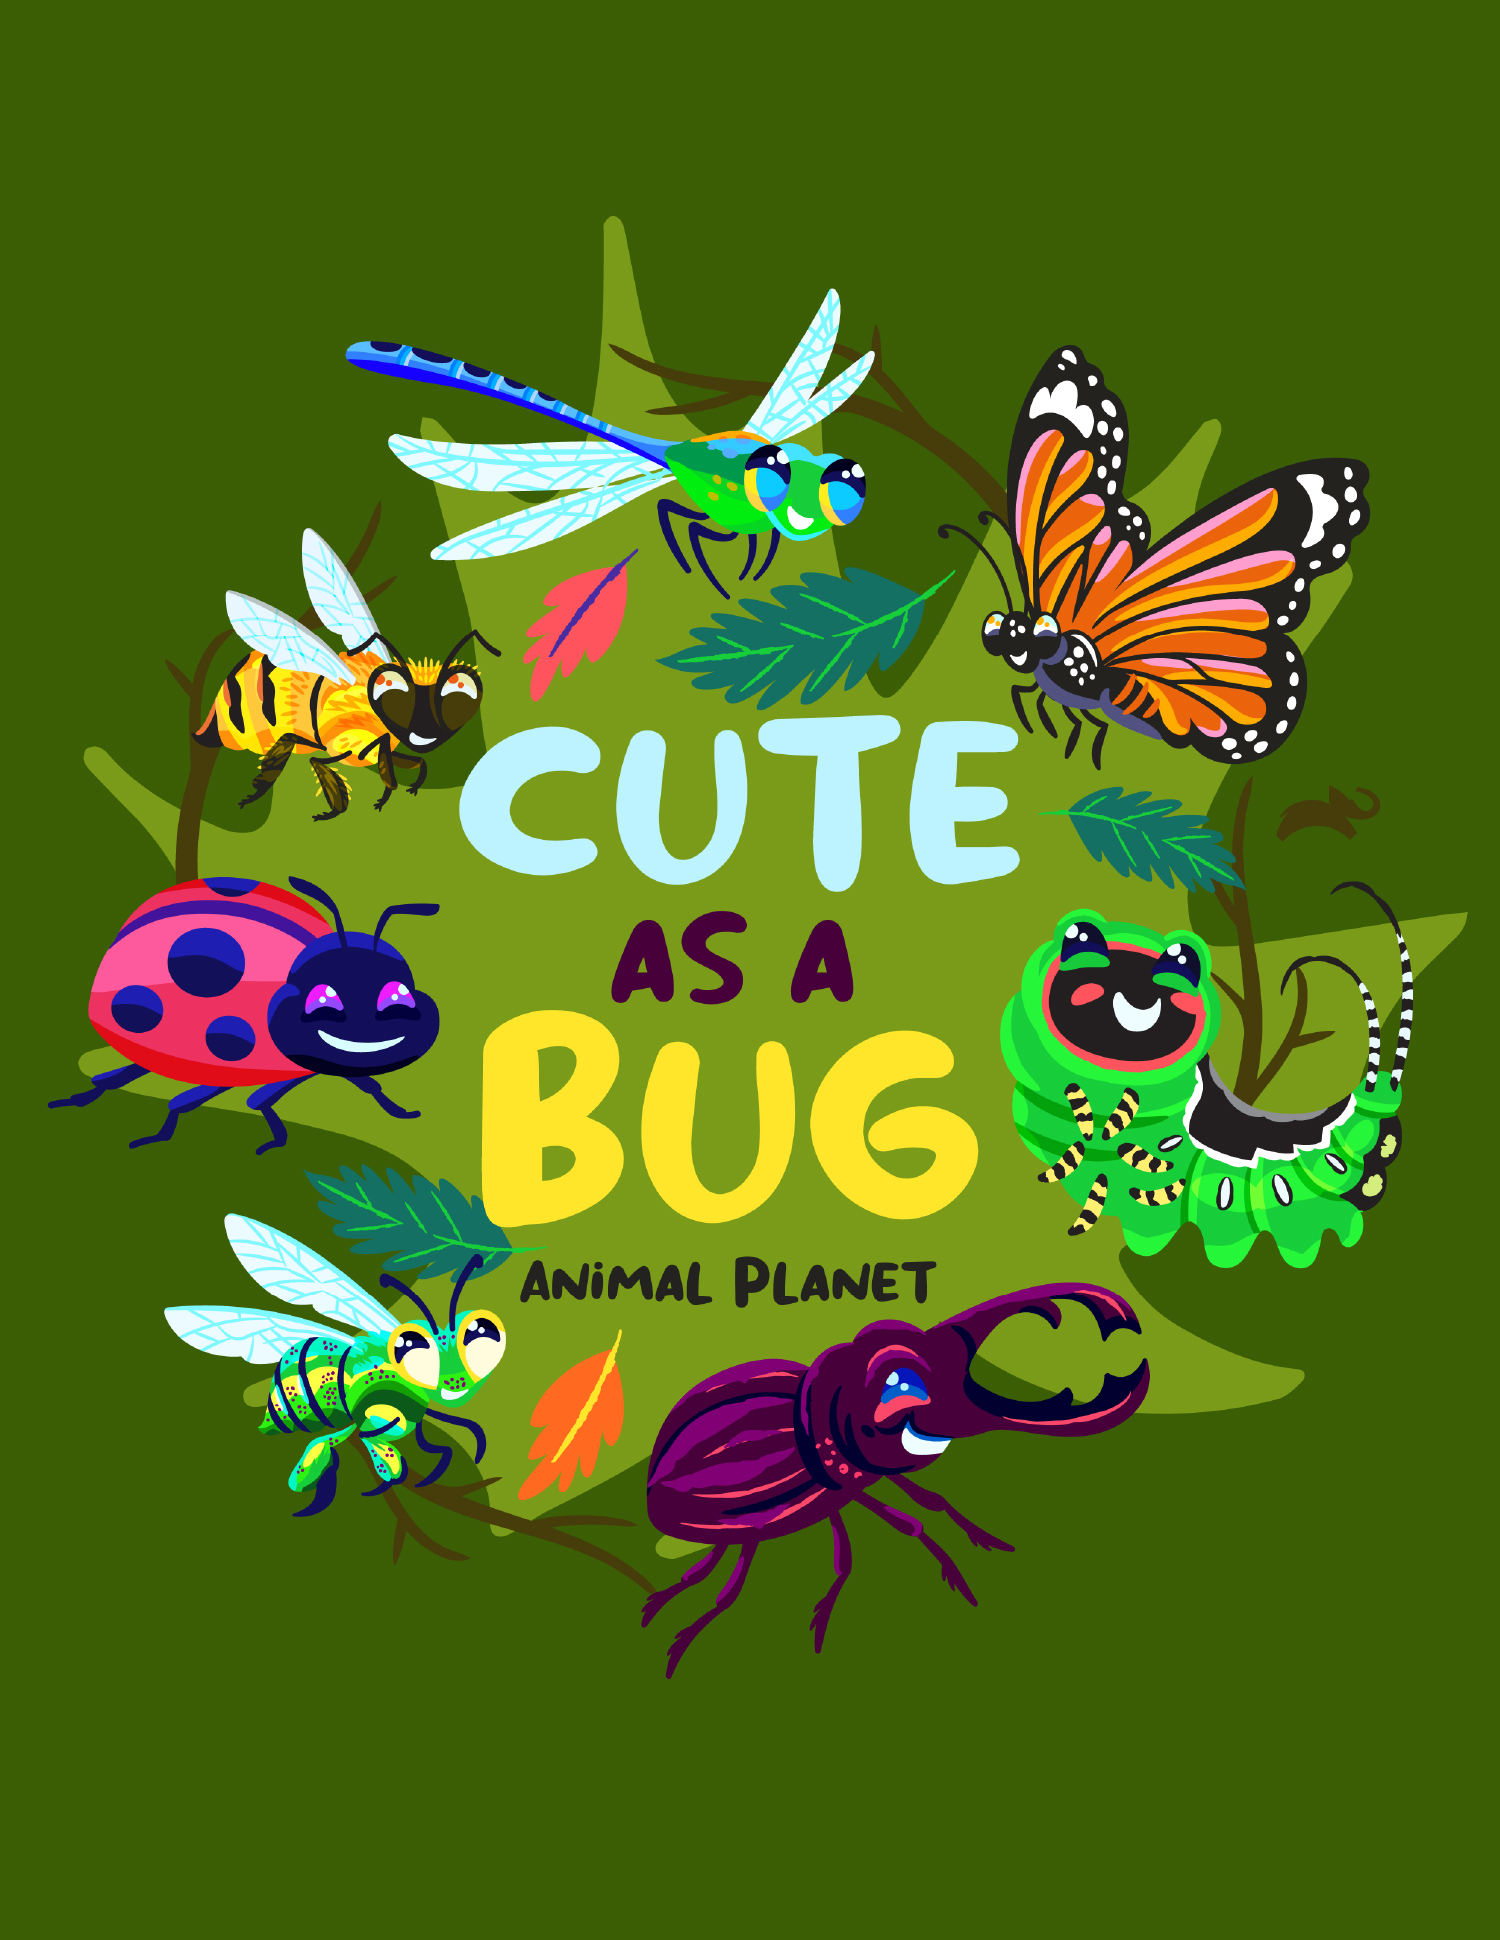 Character art in design with various bugs surrounding the words "Cute as a Bug."